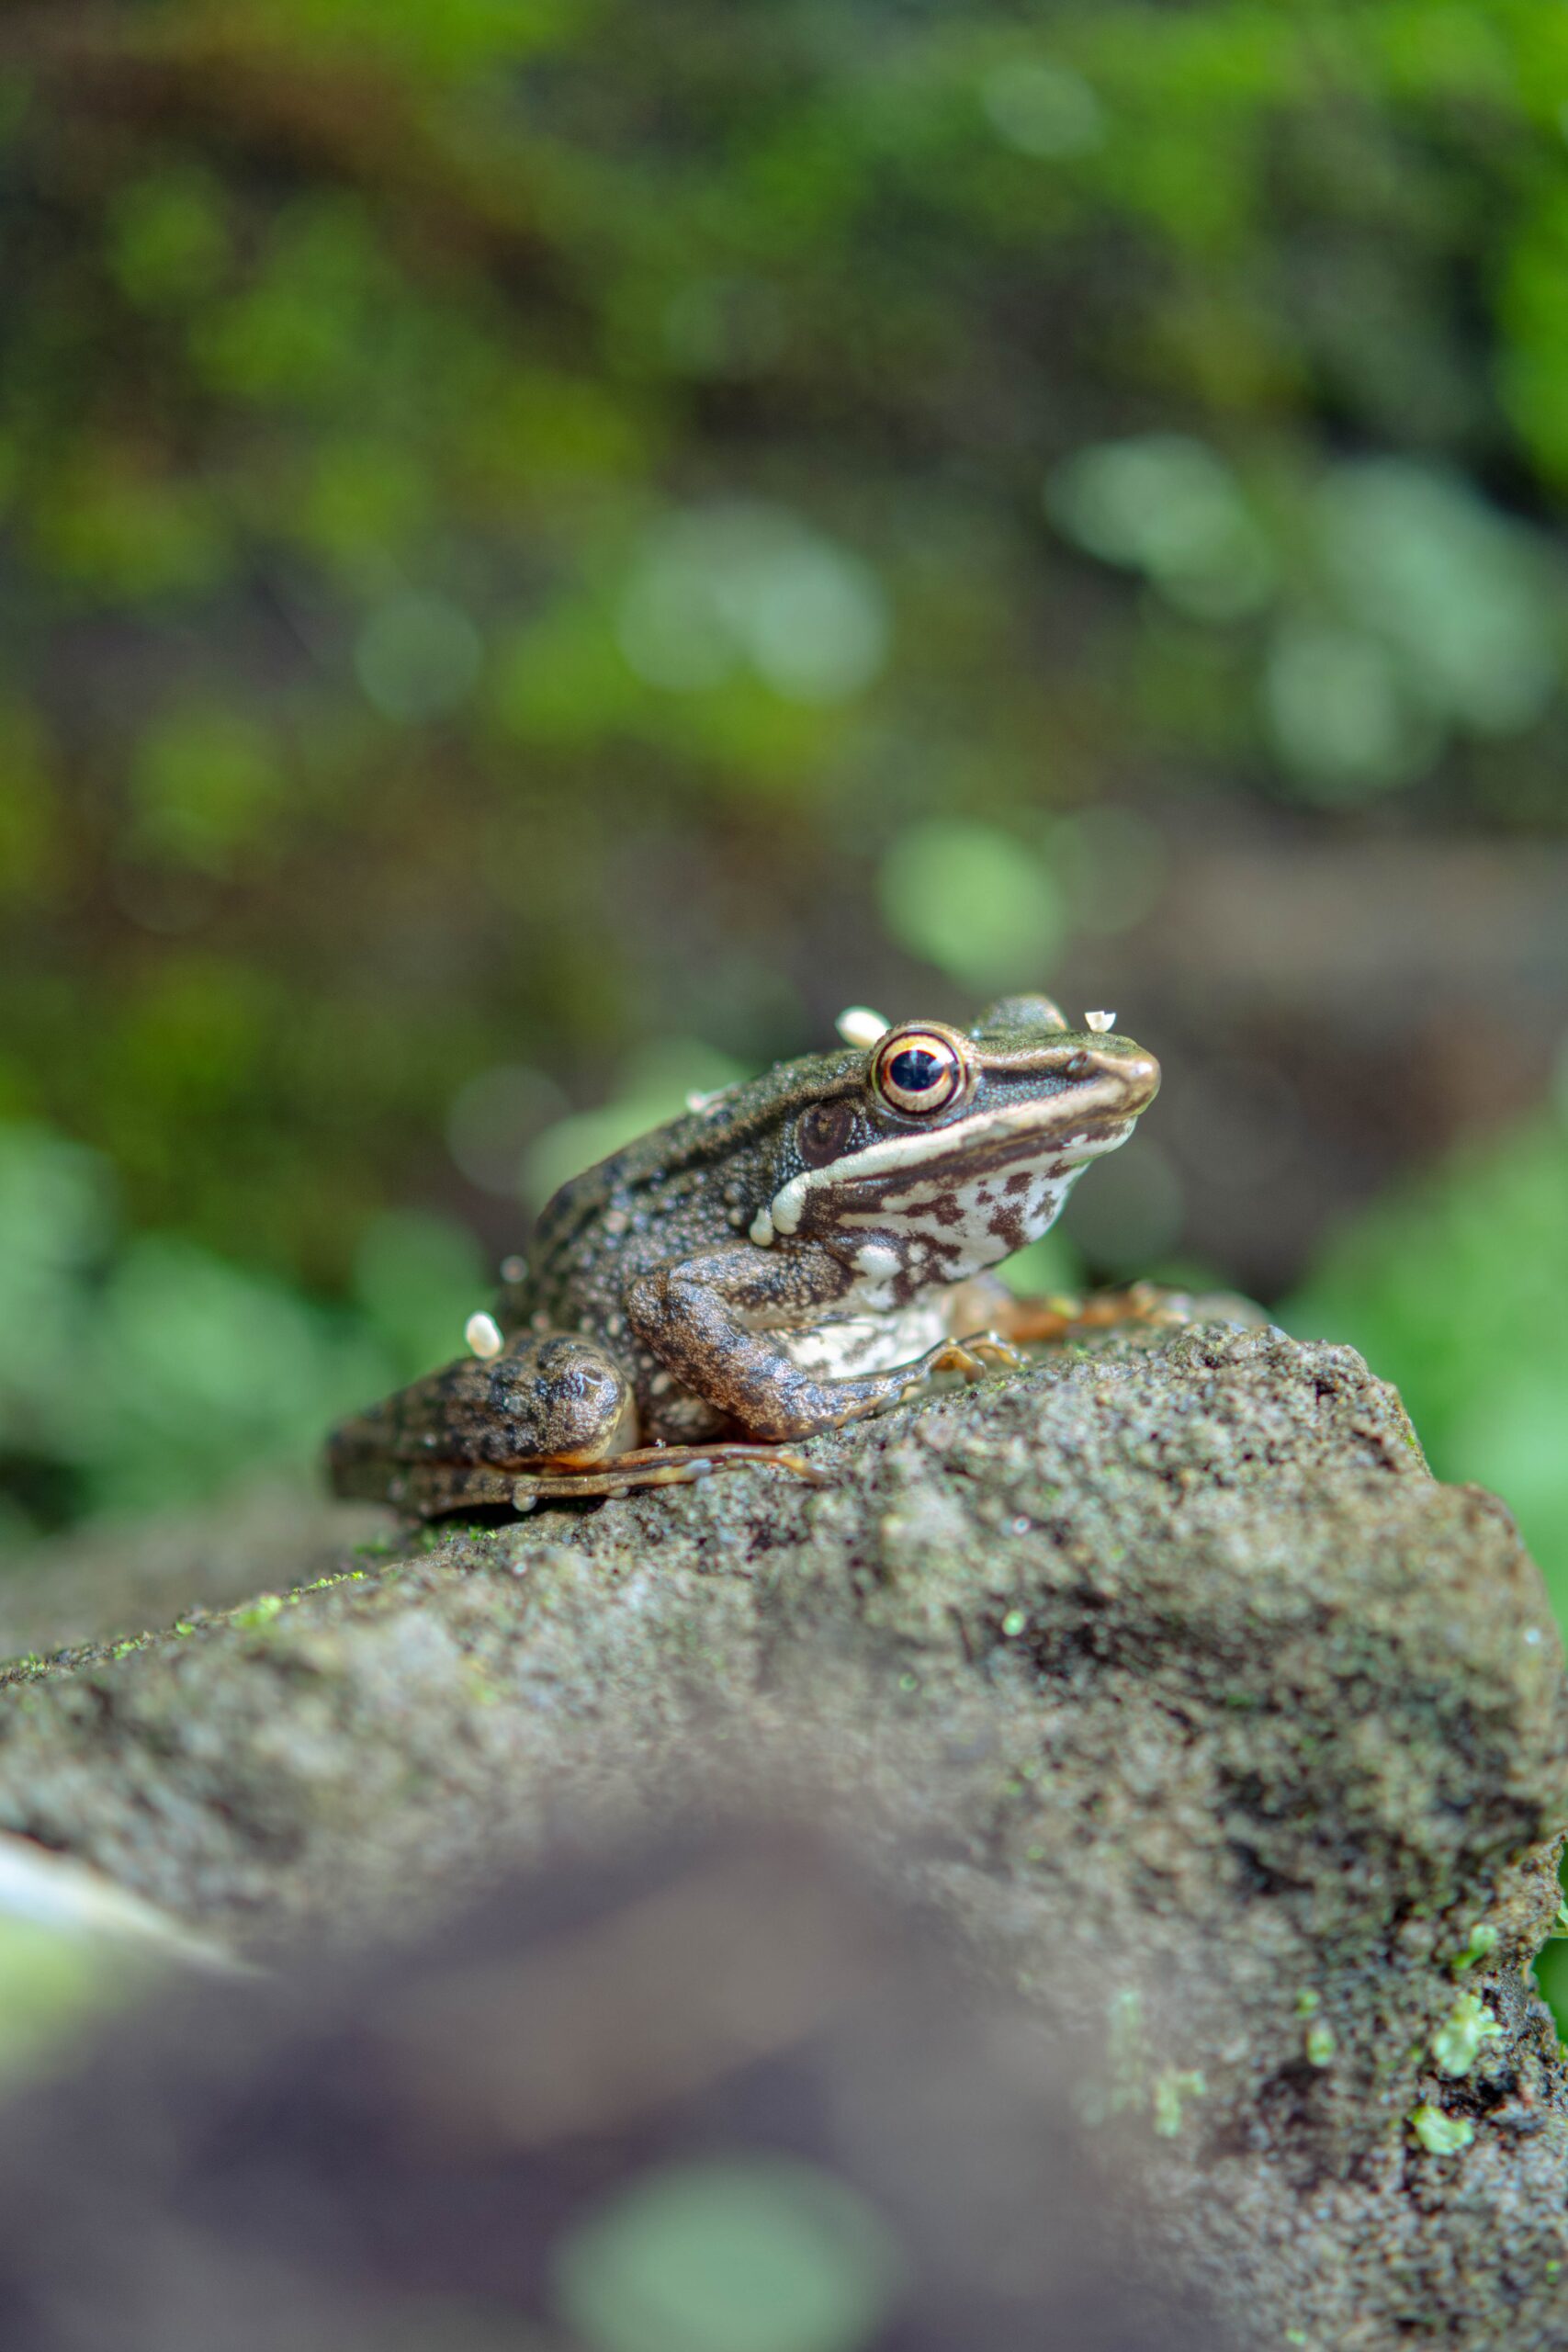 10 Symbolic Meanings of Frogs in Dreams